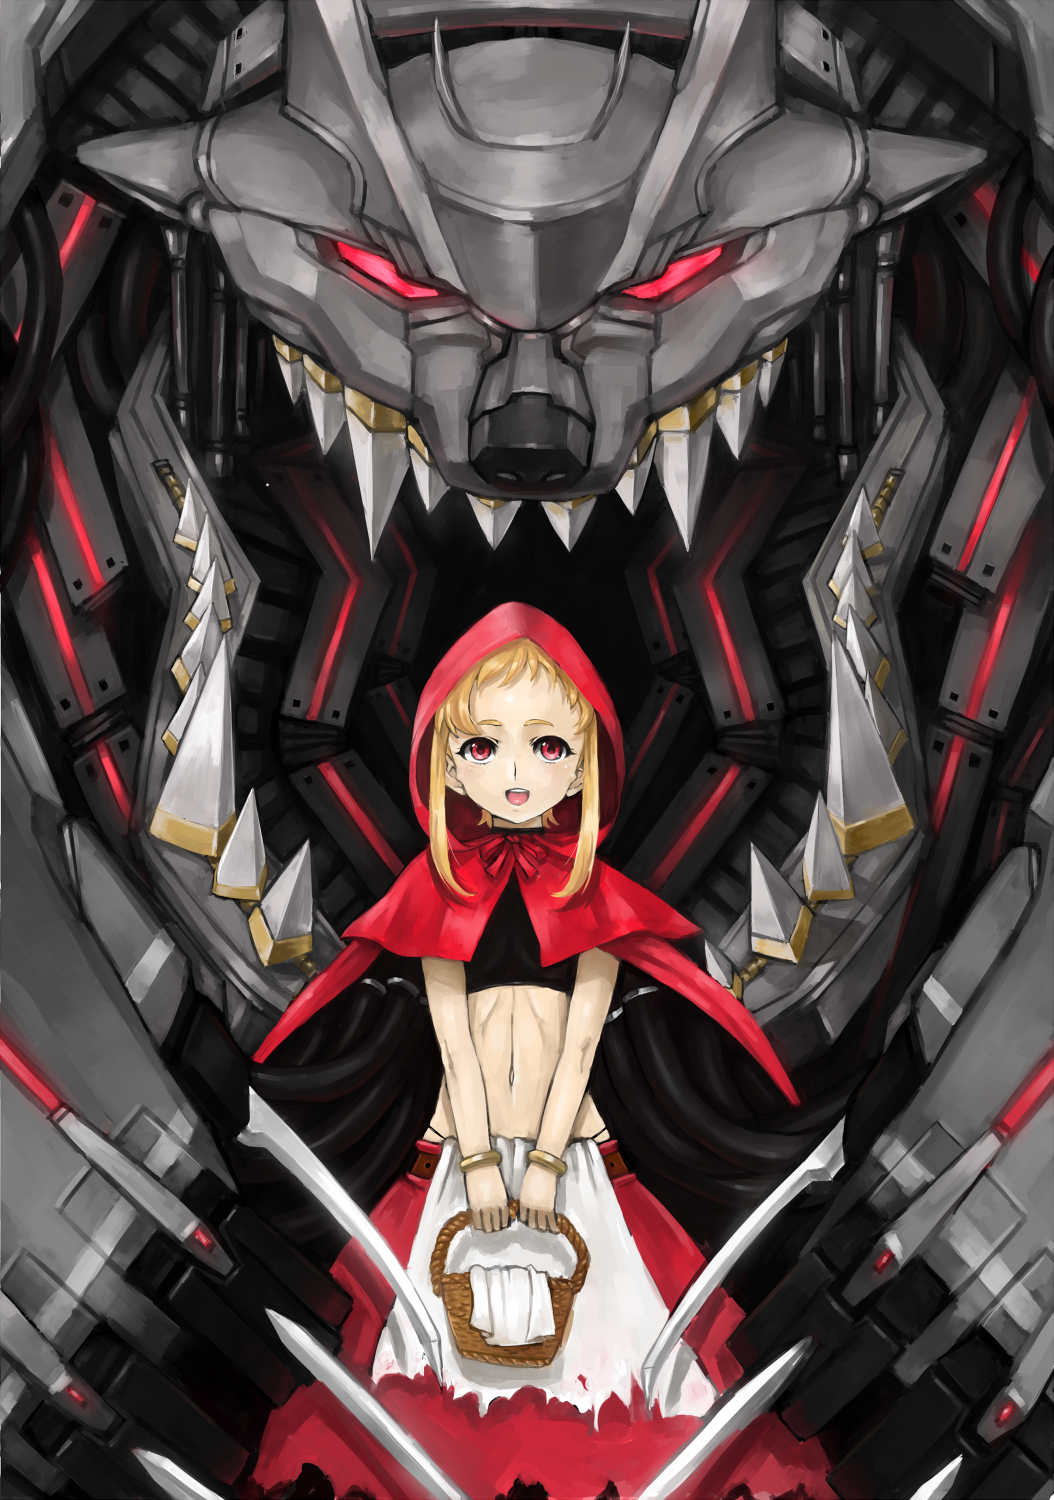 basket big_bad_wolf_(grimm) blonde_hair capelet crop_top glowing glowing_eyes grimm's_fairy_tales grimm's_fairy_tales highres hood little_red_riding_hood little_red_riding_hood_(grimm) madarame mecha mechanization payot red_eyes science_fiction sharp_teeth short_hair skirt torn_clothes torn_skirt